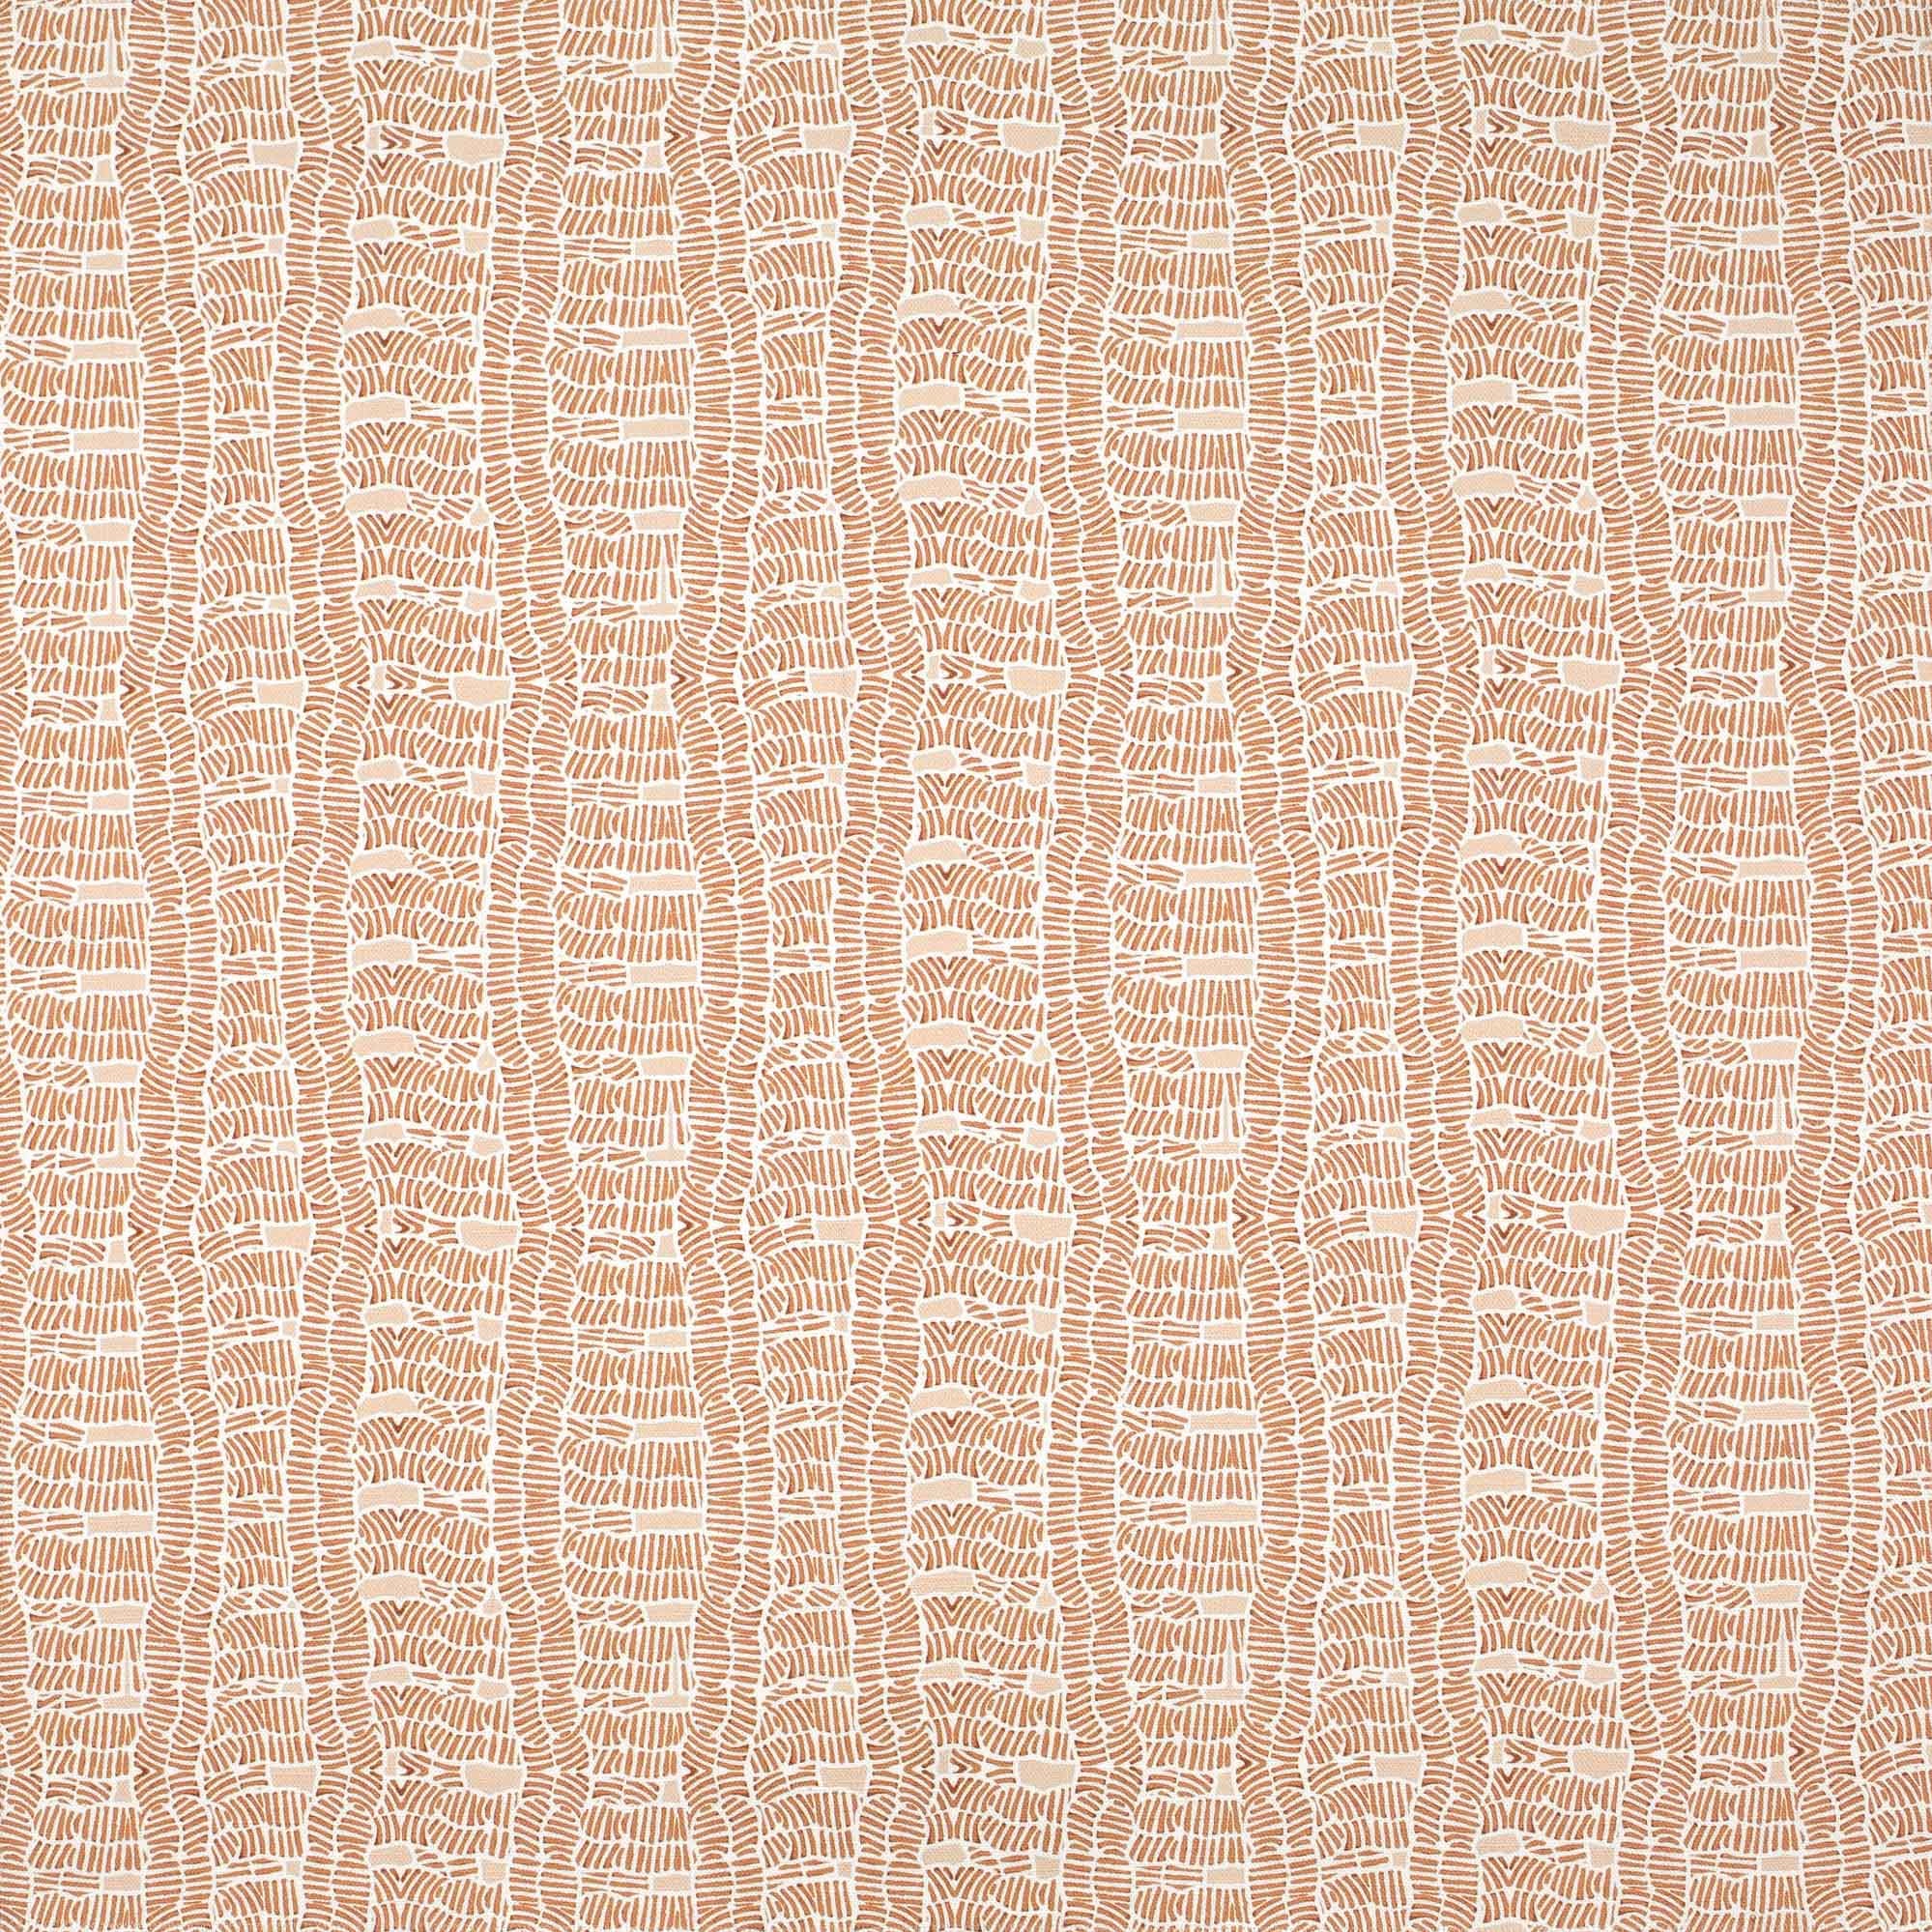 Detail of fabric in a playful curvy grid print in peach on a white field.